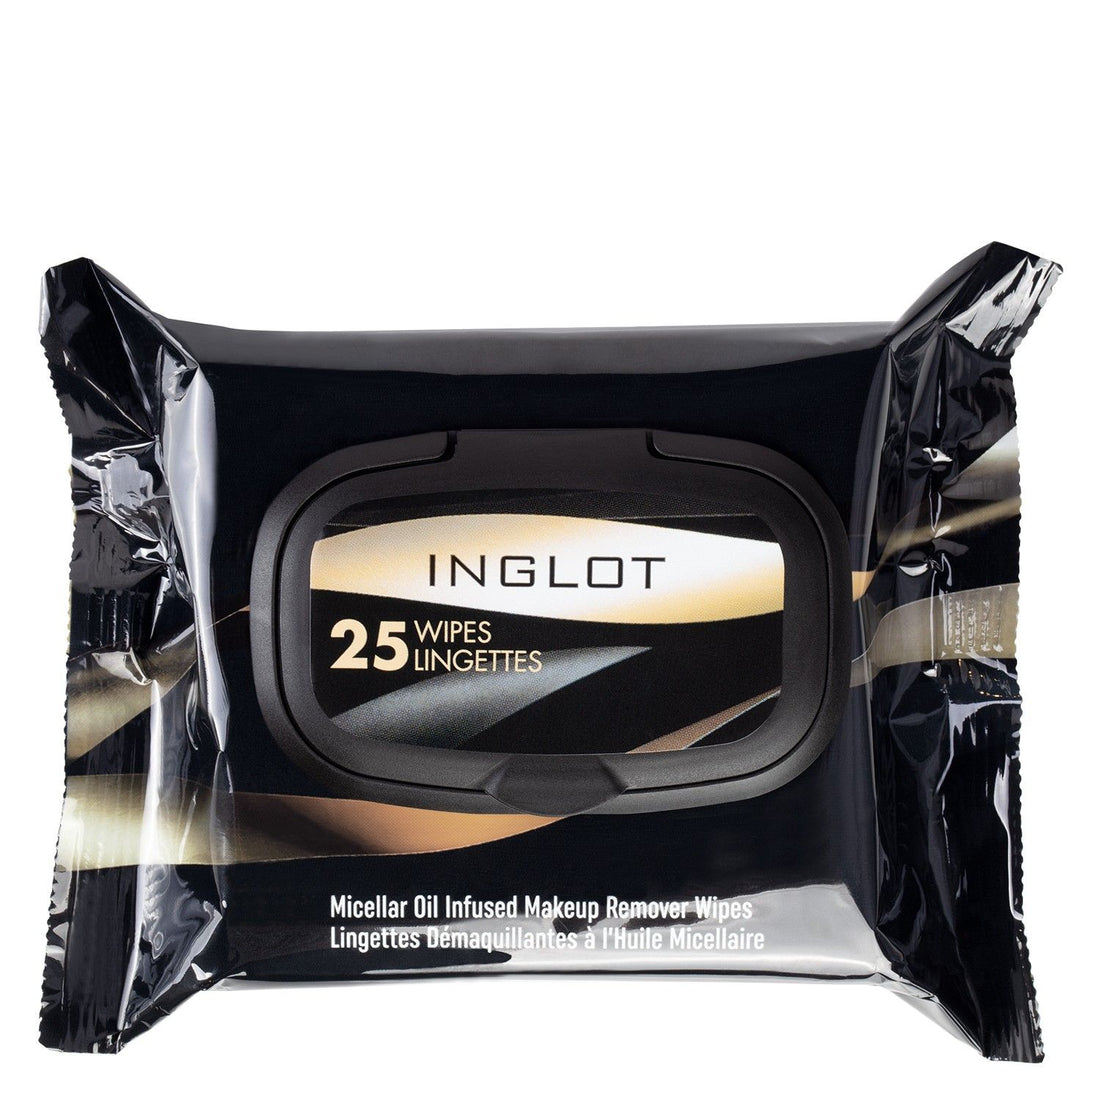 Micellair Oil Infused Makeup Remover Wipes - Inglot Cosmetics